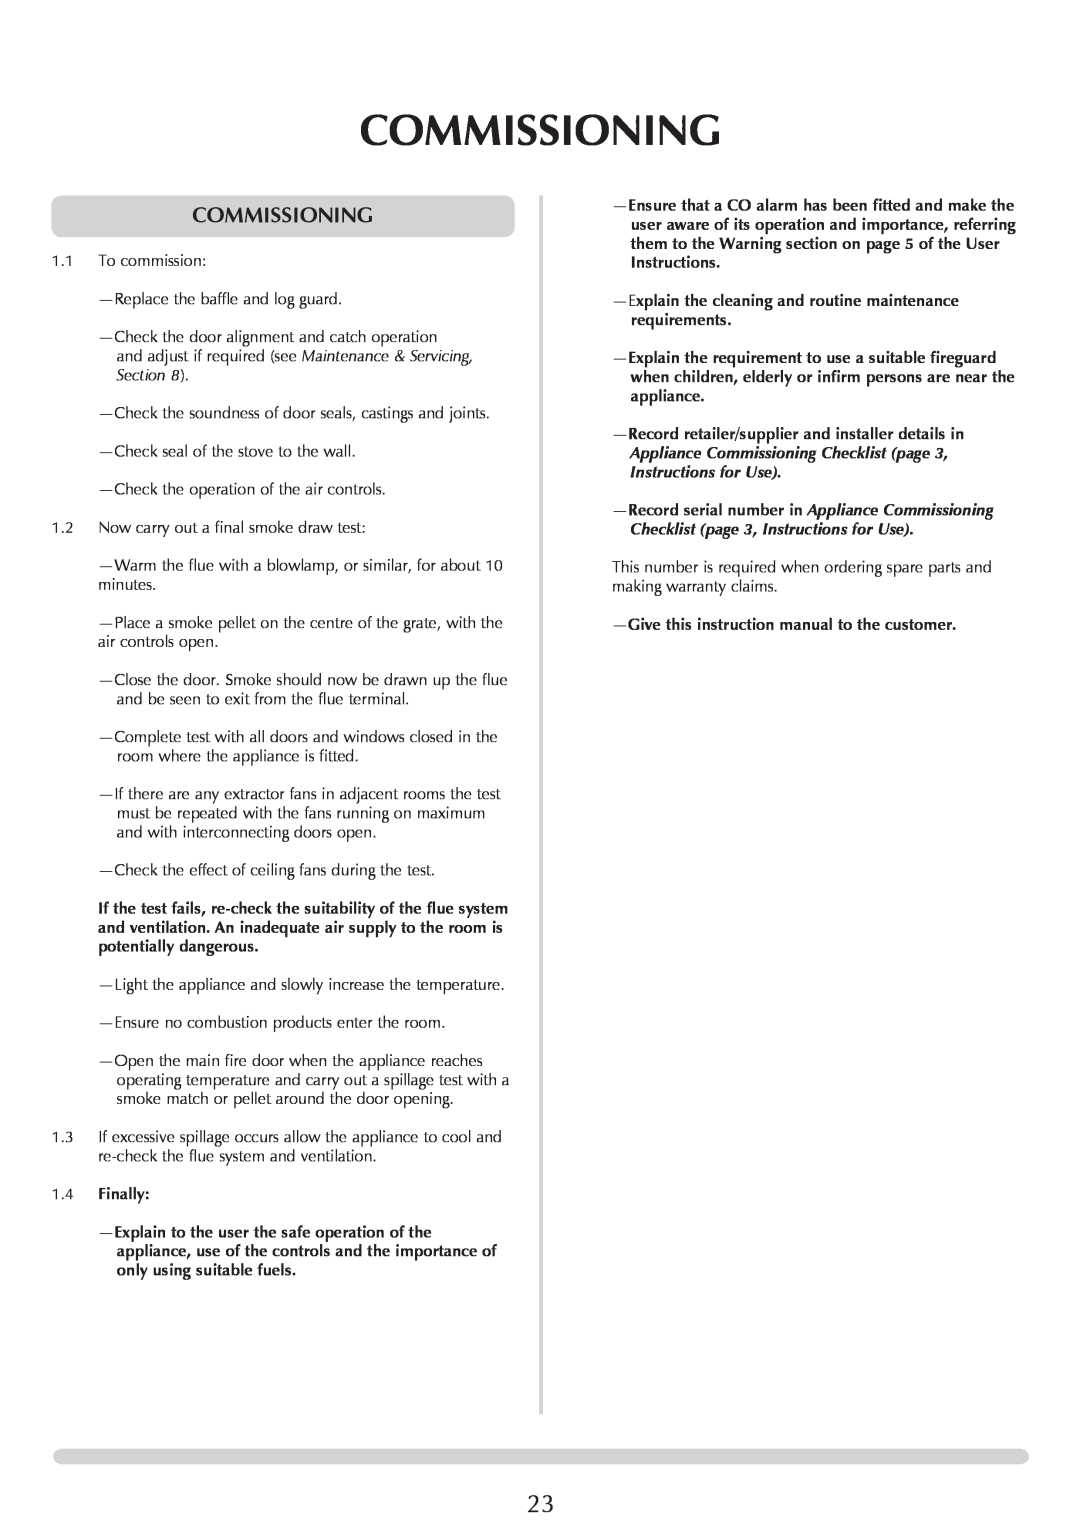 Yeoman YMMB manual Commissioning, Checklist page 3, Instructions for Use 